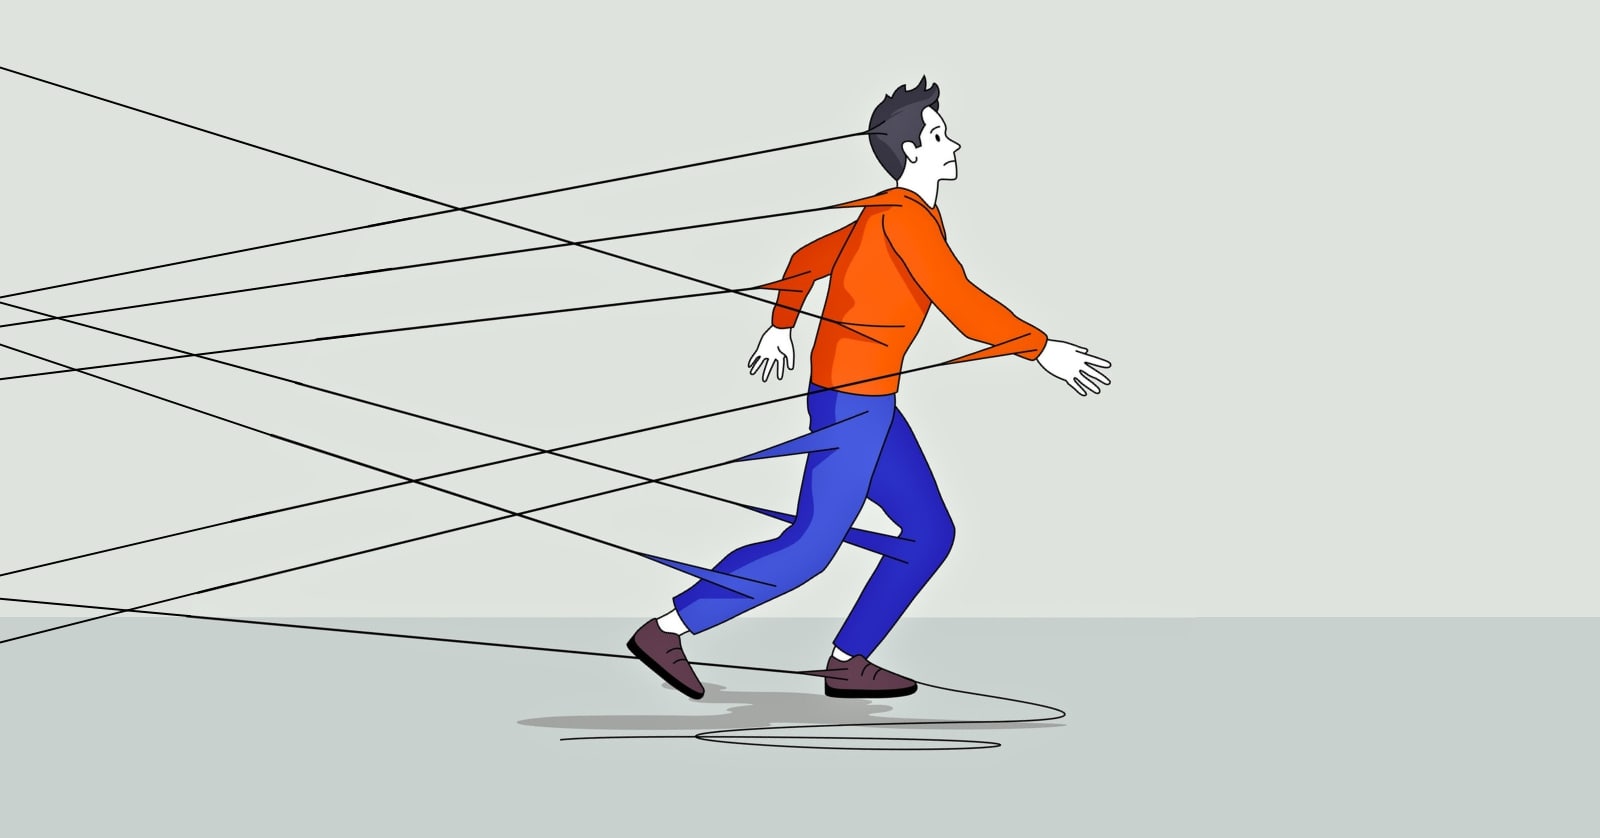 illustration of a man wearing blue pants and a red top being pulled back by several black lines